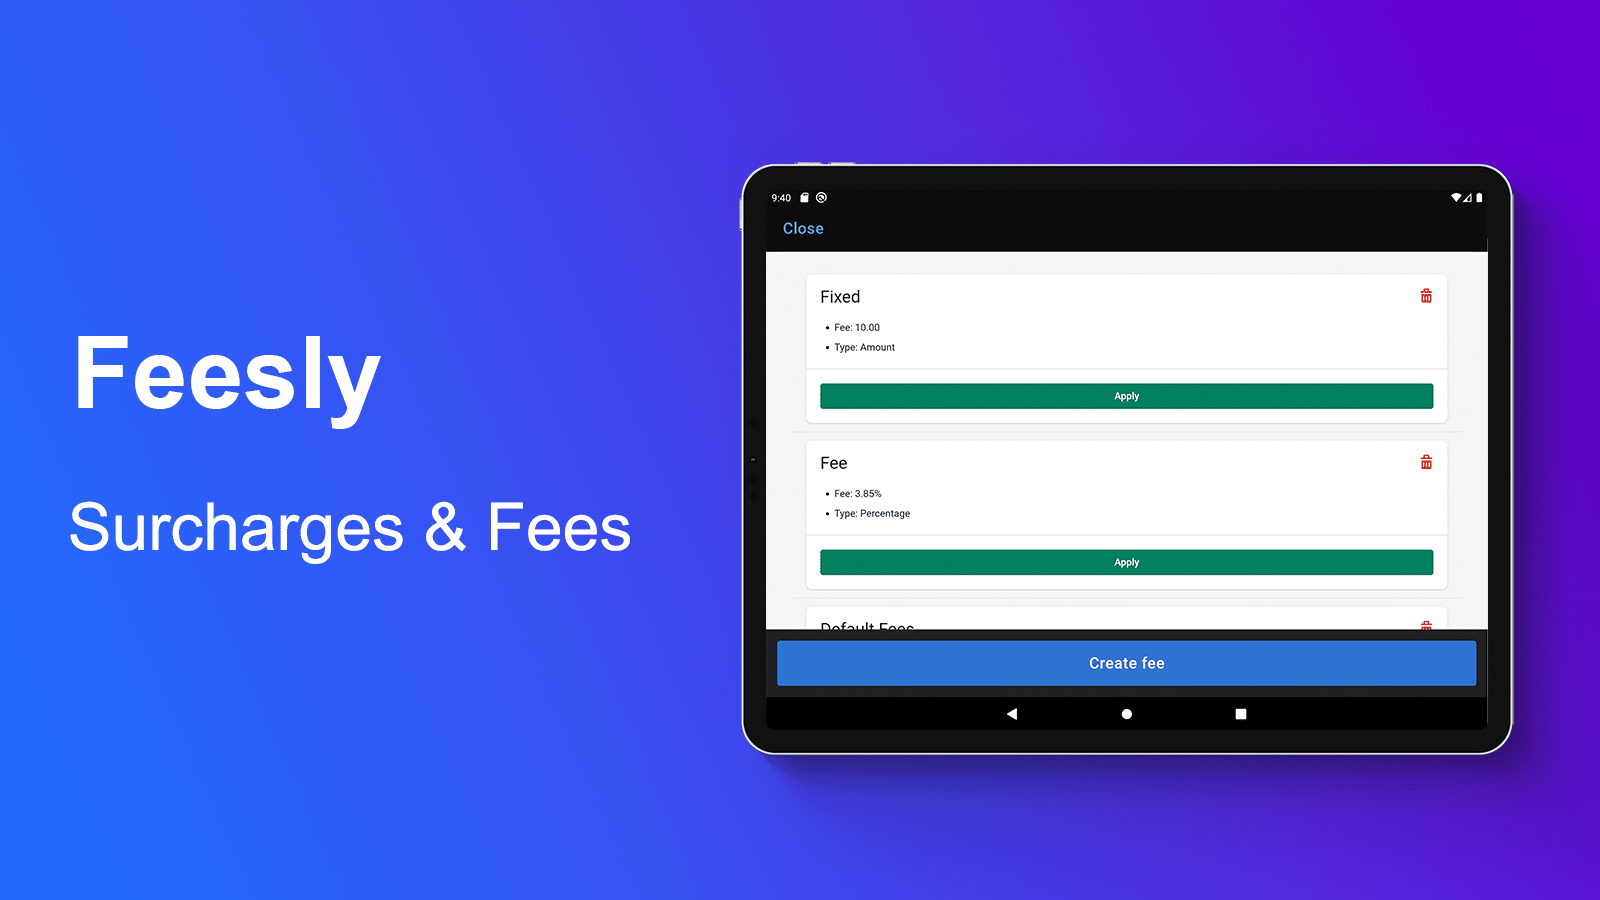 Feesly: Surcharges & Fees